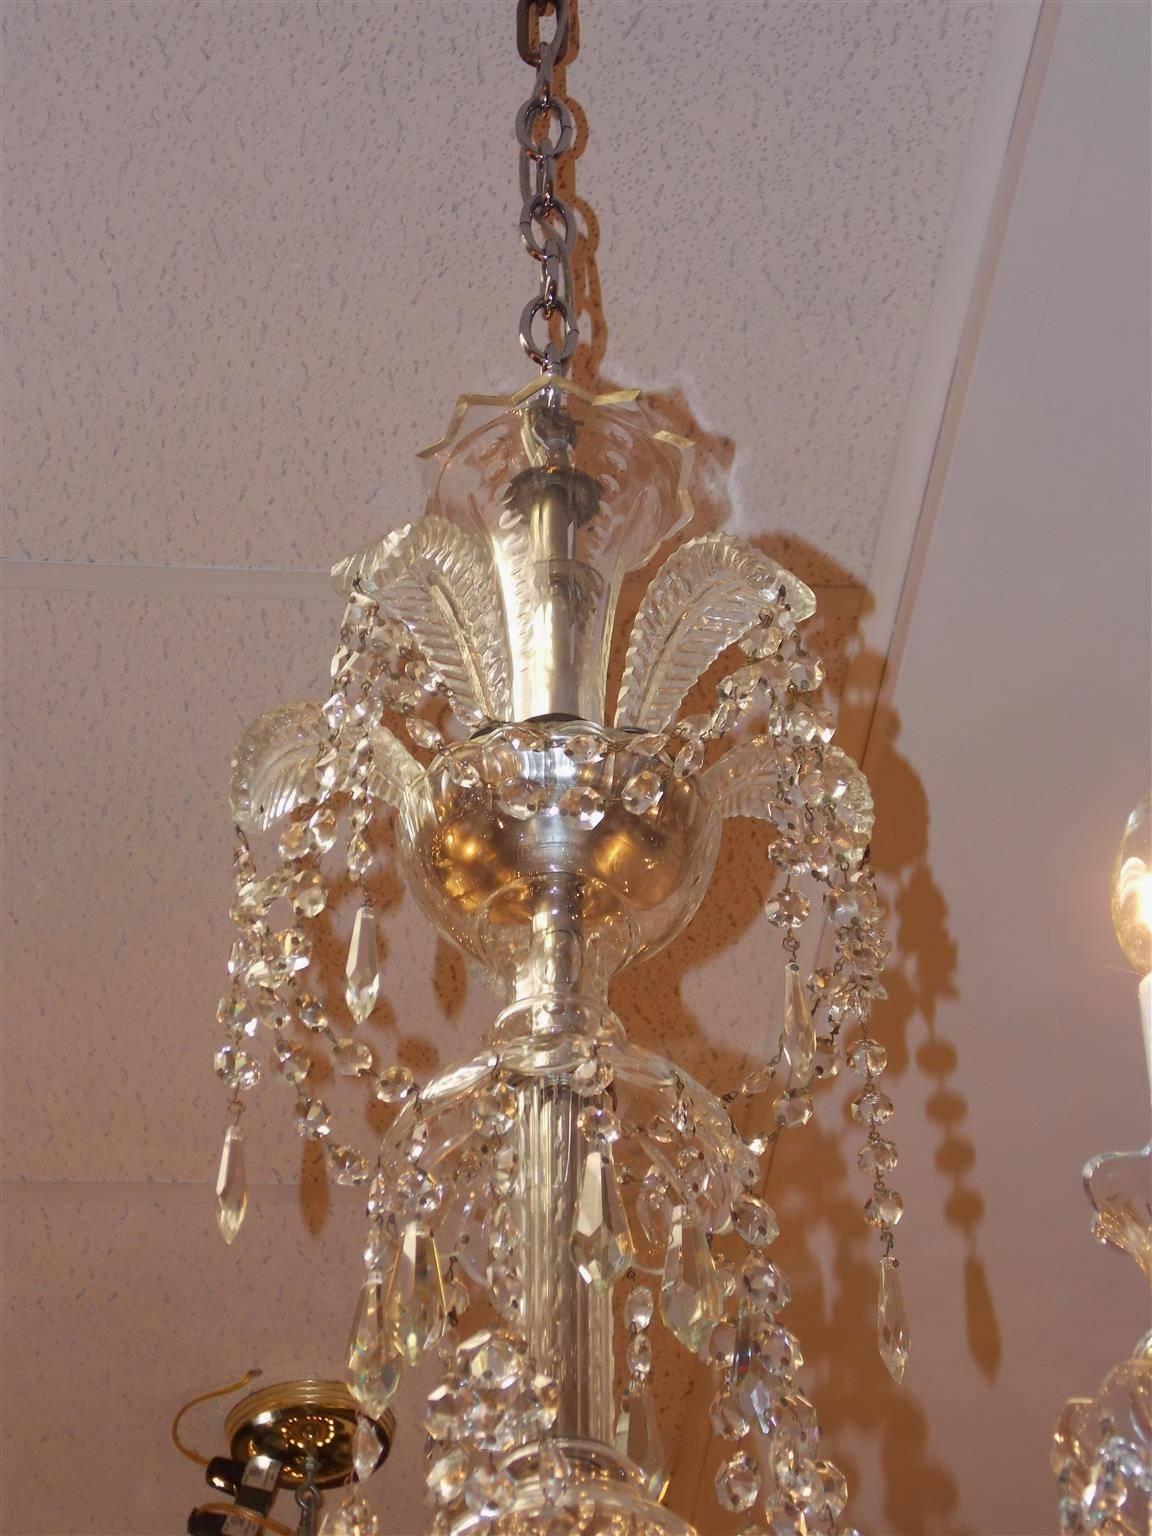 Hand-Crafted Anglo-Irish Cut Crystal Decorative Feather Five-Arm Chandelier, Circa 1840